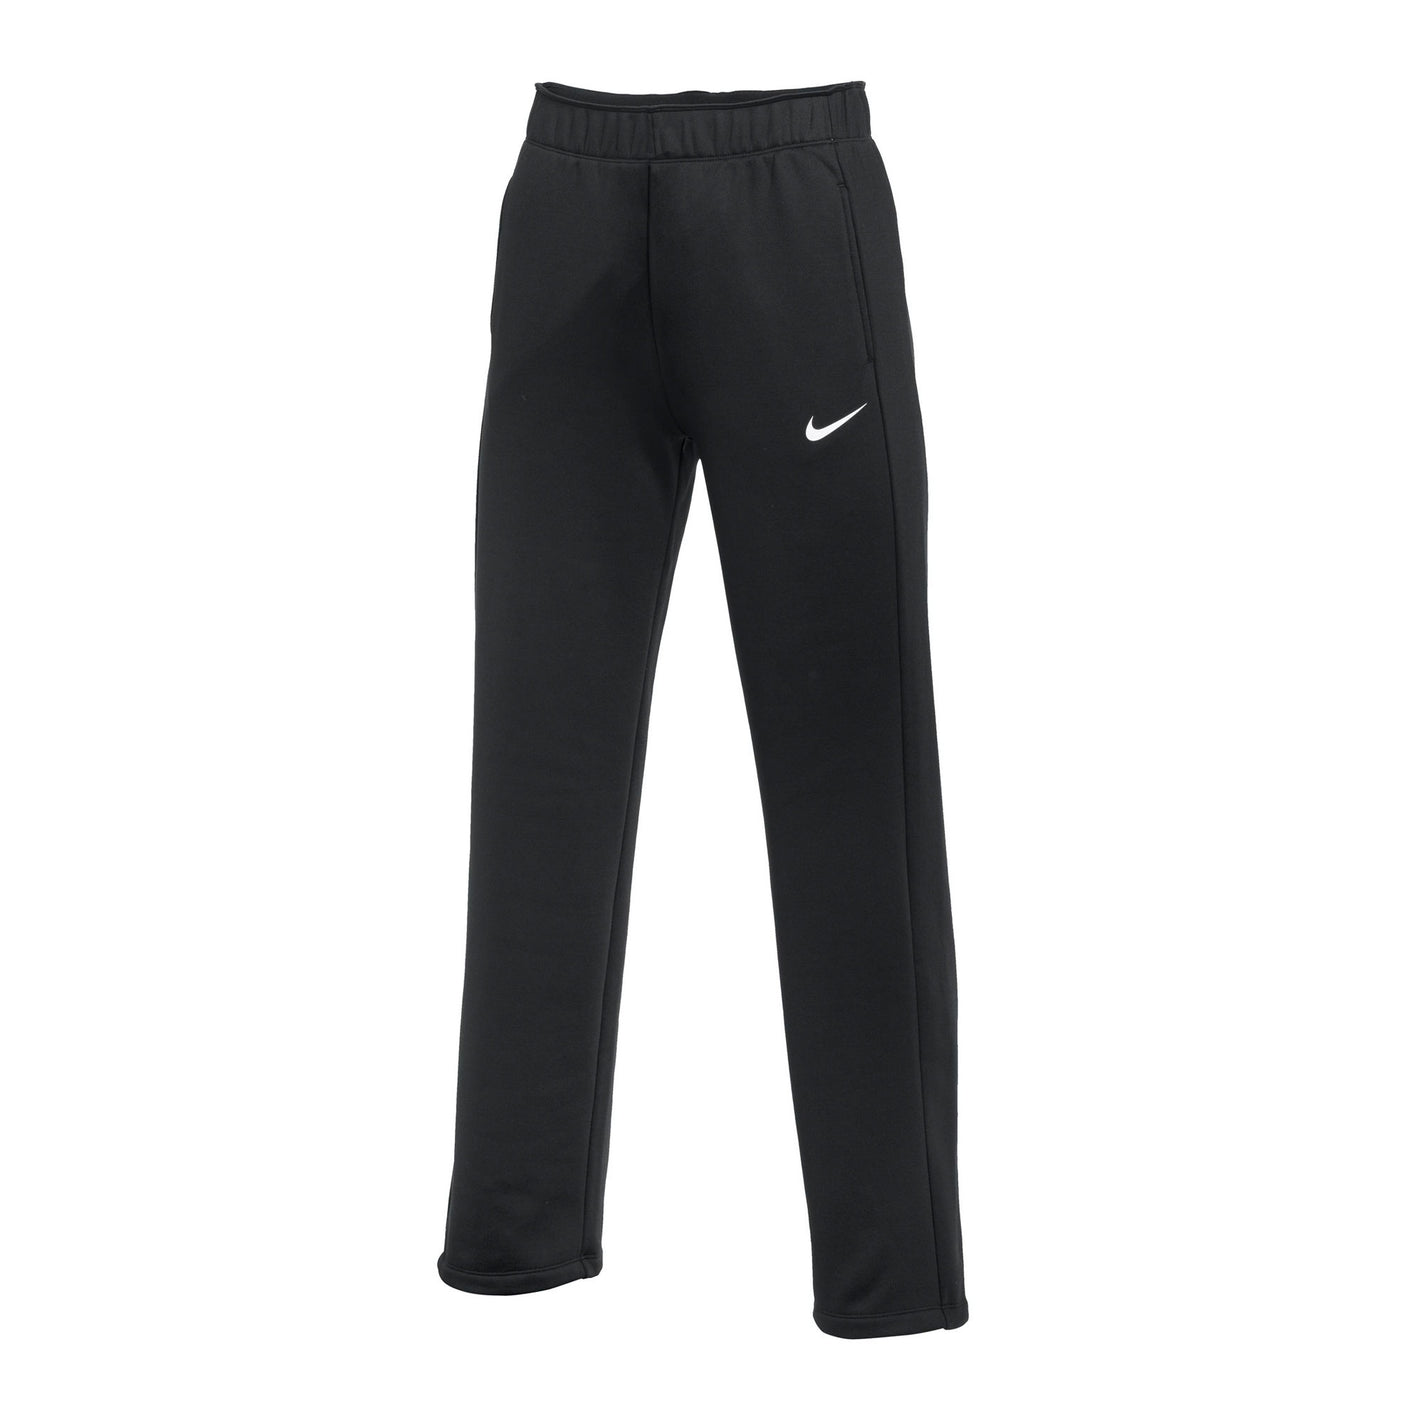 https://aztecasoccer.com/cdn/shop/products/nike-womens-therma-training-pants-black-white-front.jpg?v=1658940489&width=1406